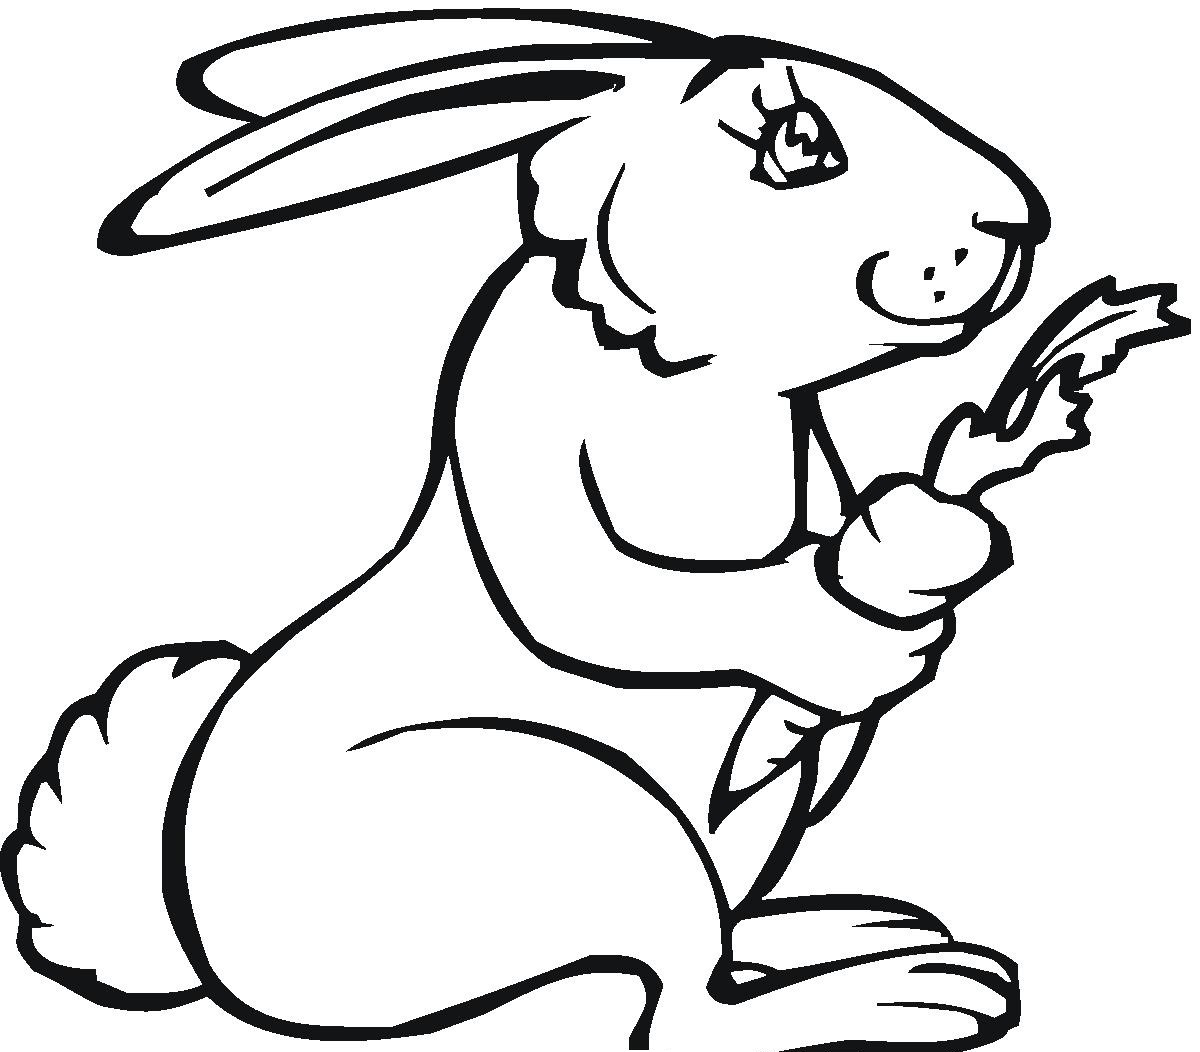 Year of the Rabbit Coloring Page